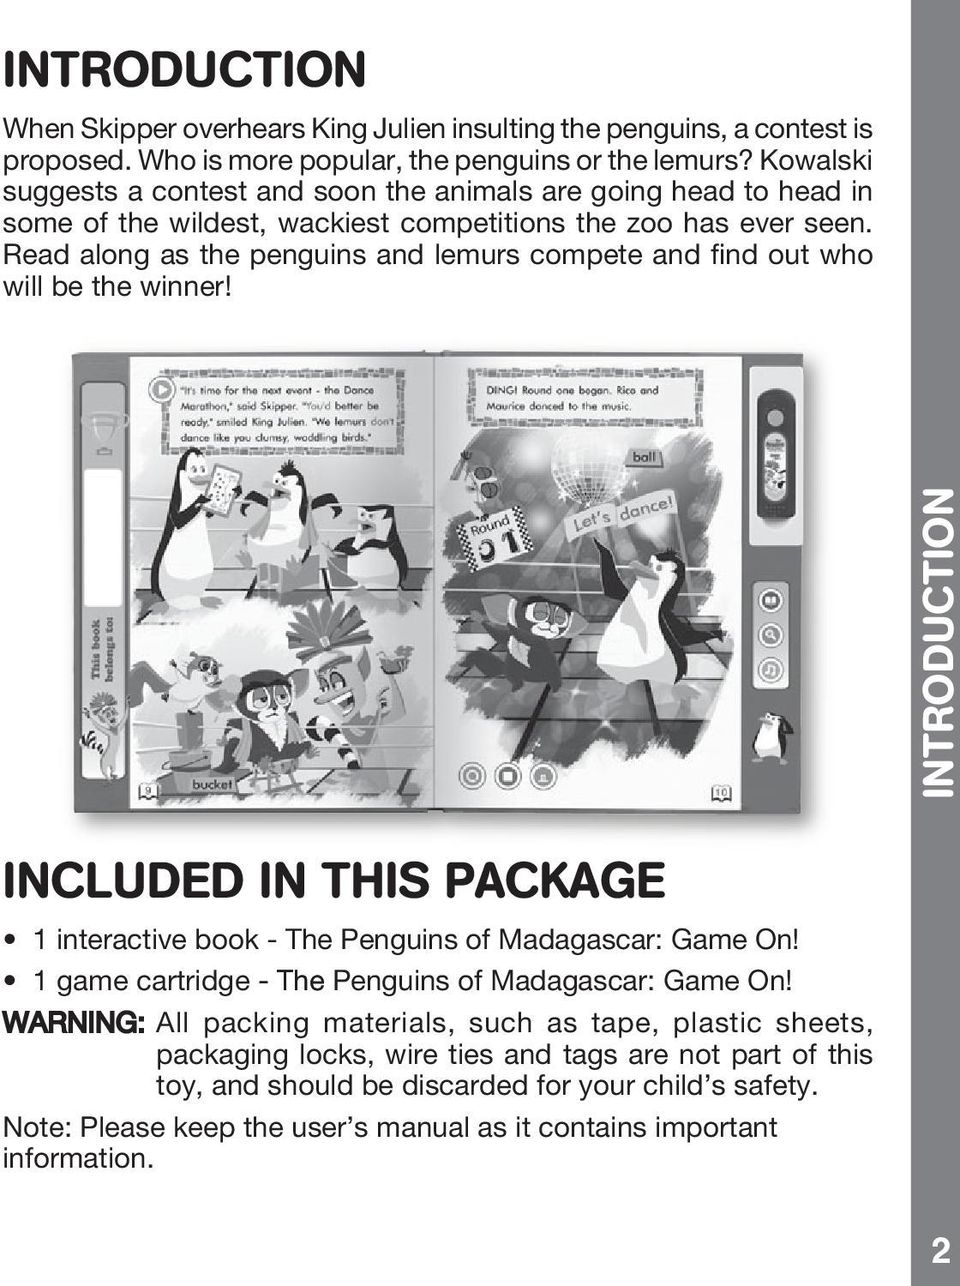 Read along as the penguins and lemurs compete and find out who will be the winner! INTRODUCTION INCLUDED IN THIS PACKAGE 1 interactive book - The Penguins of Madagascar: Game On!